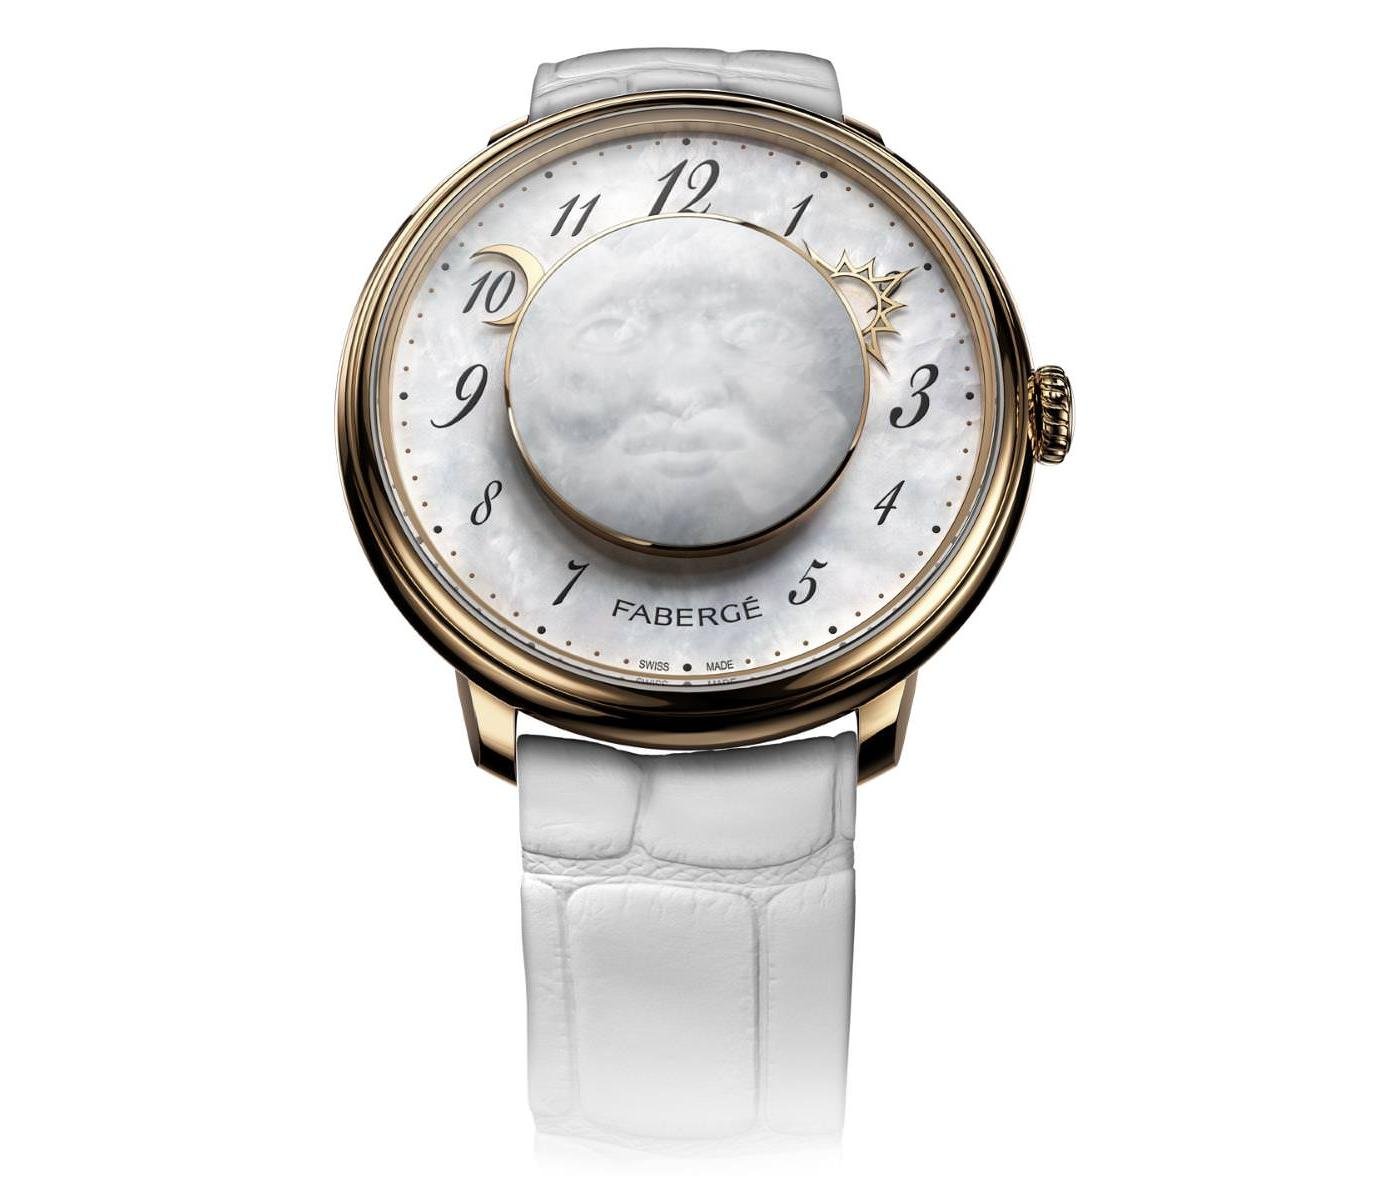 Watch by Fabergé